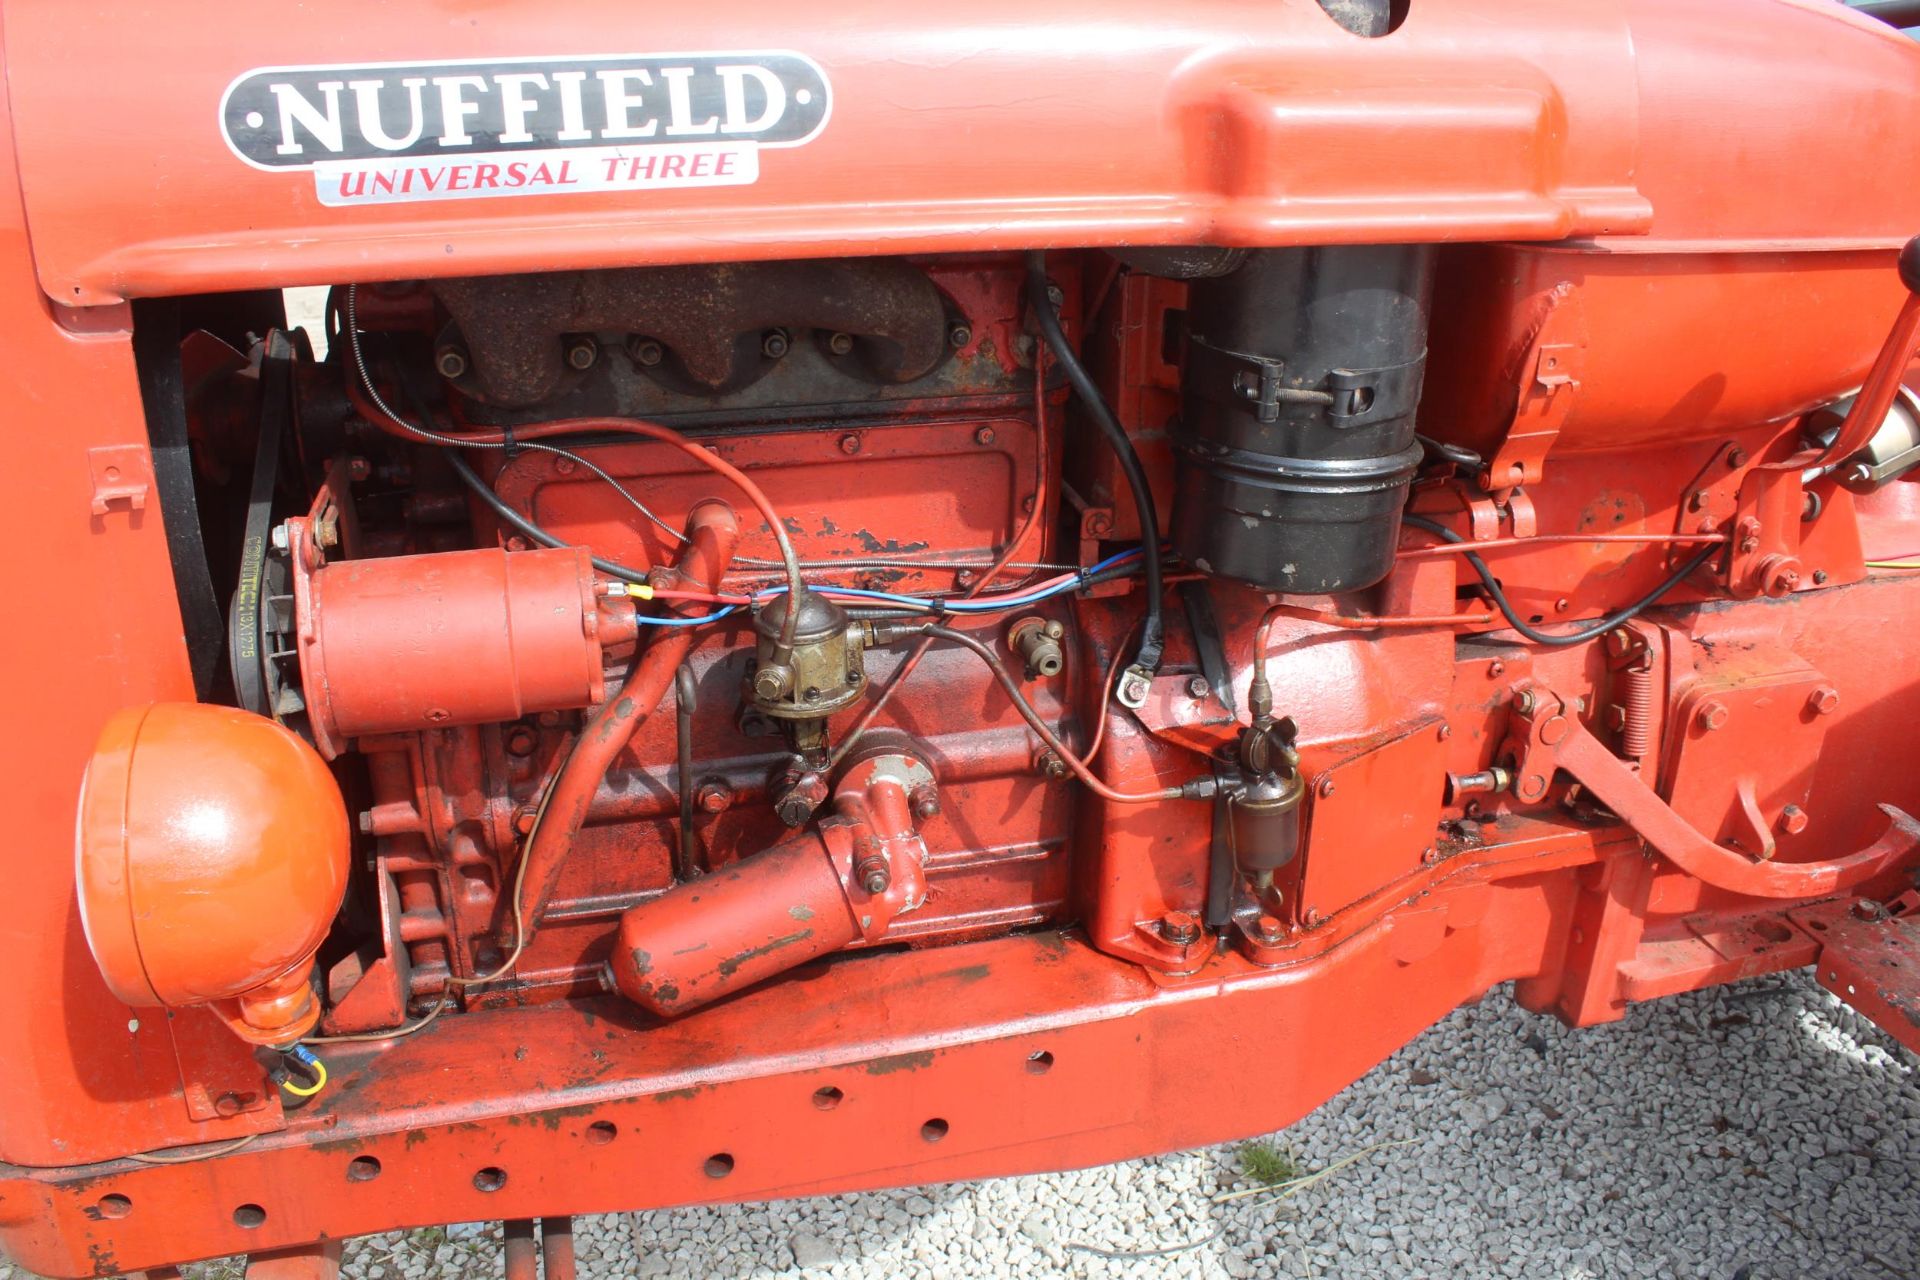 A NUFFIELD UNIVERSAL THREE TRACTOR GOOD ORDER RECENT REBUILD 4 NEW TYRES RE - CON STARTER CLUTCH & - Image 7 of 9